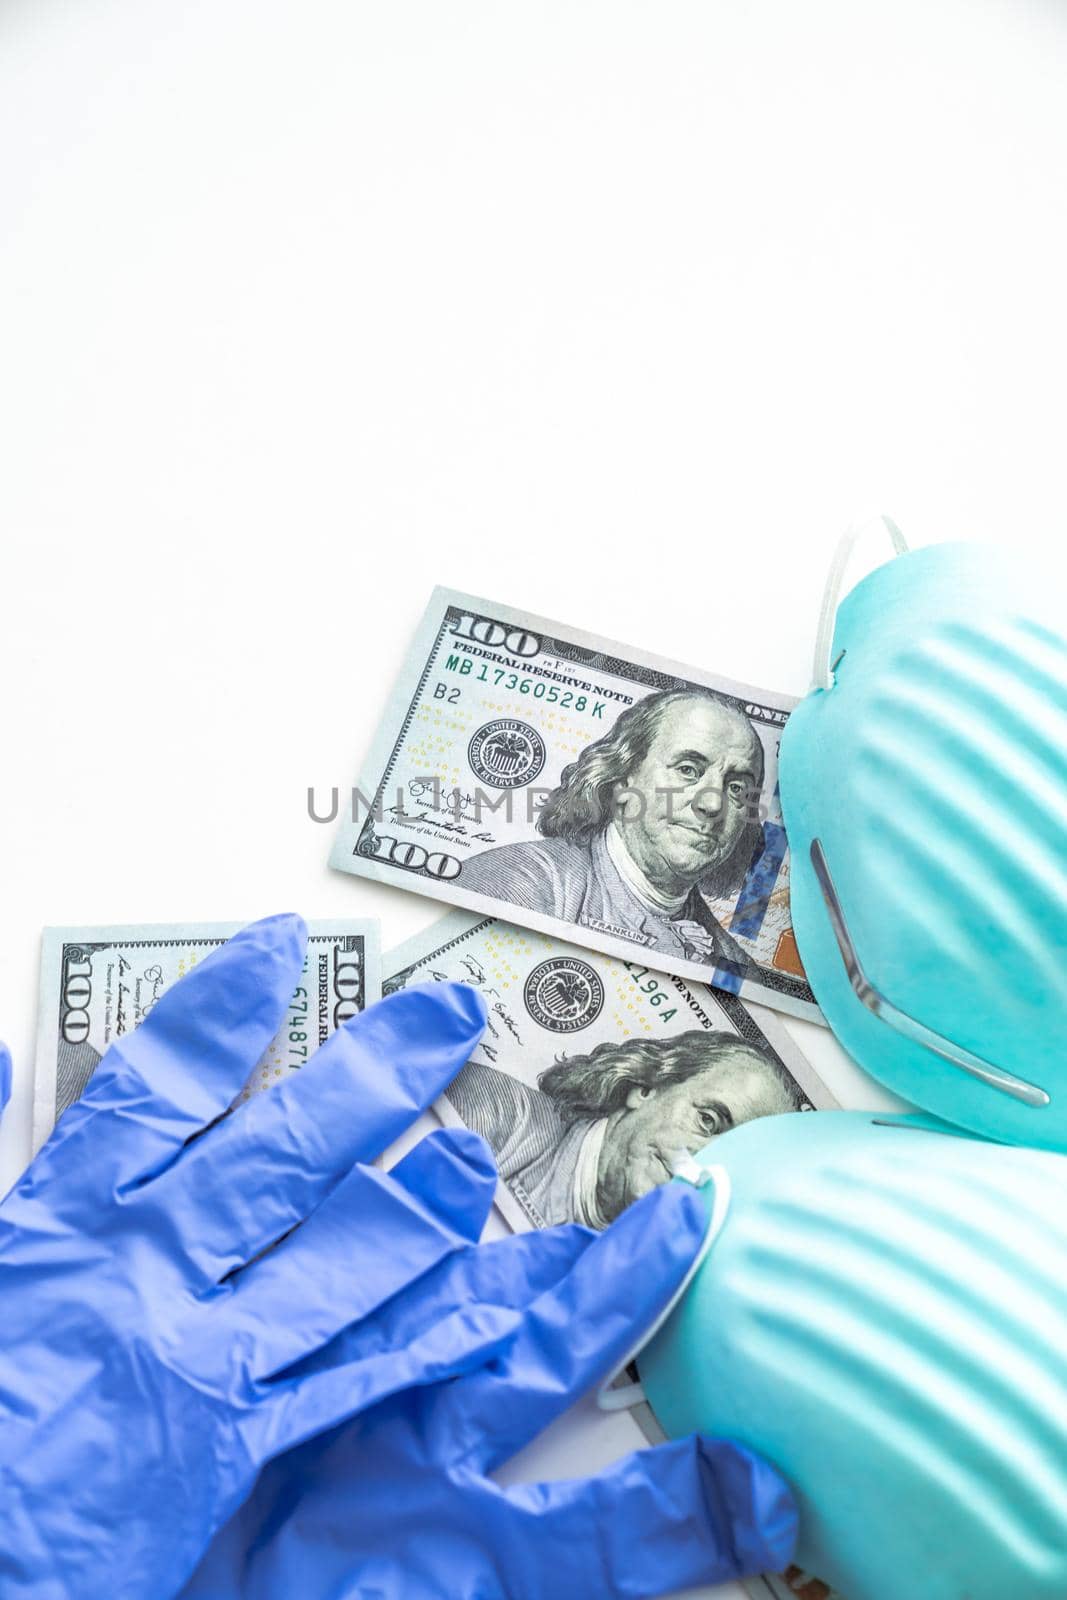 A close up of a few hundred dollar bills or cash laying below blue ribbed medical masks and pair of worn used latex gloves for protection from the coronavirus COVID-19 pandemic with white copy space.